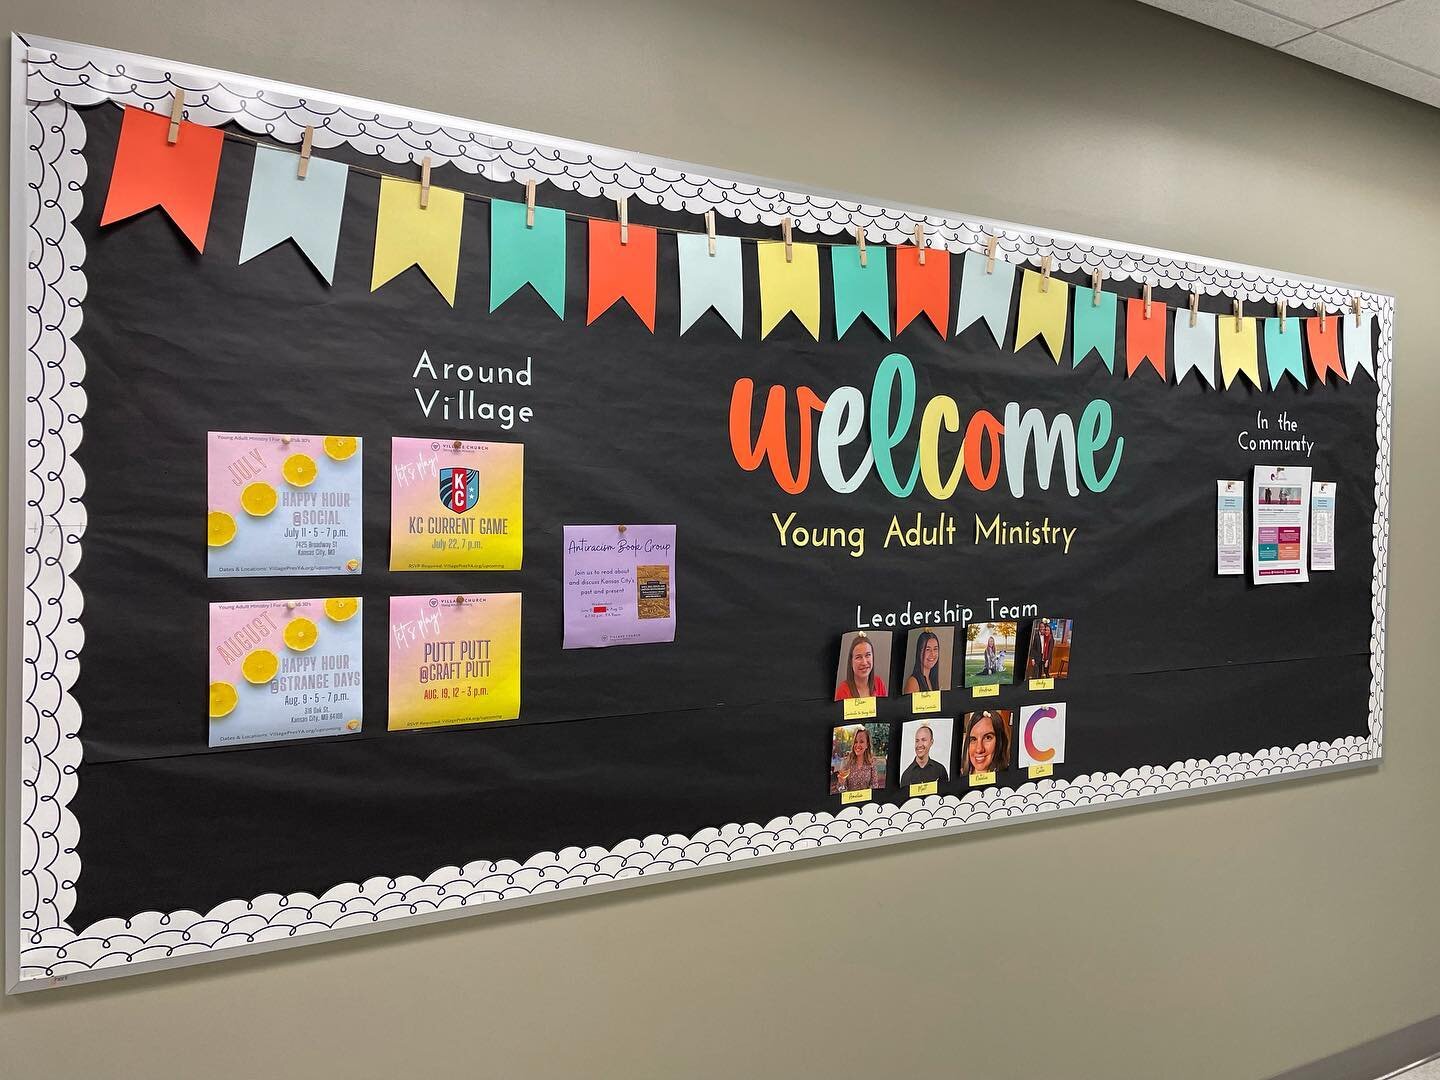 Next time you're near the YA space come check out the bulletin board to meet our leadership team and see connectional opportunities around the church and beyond!